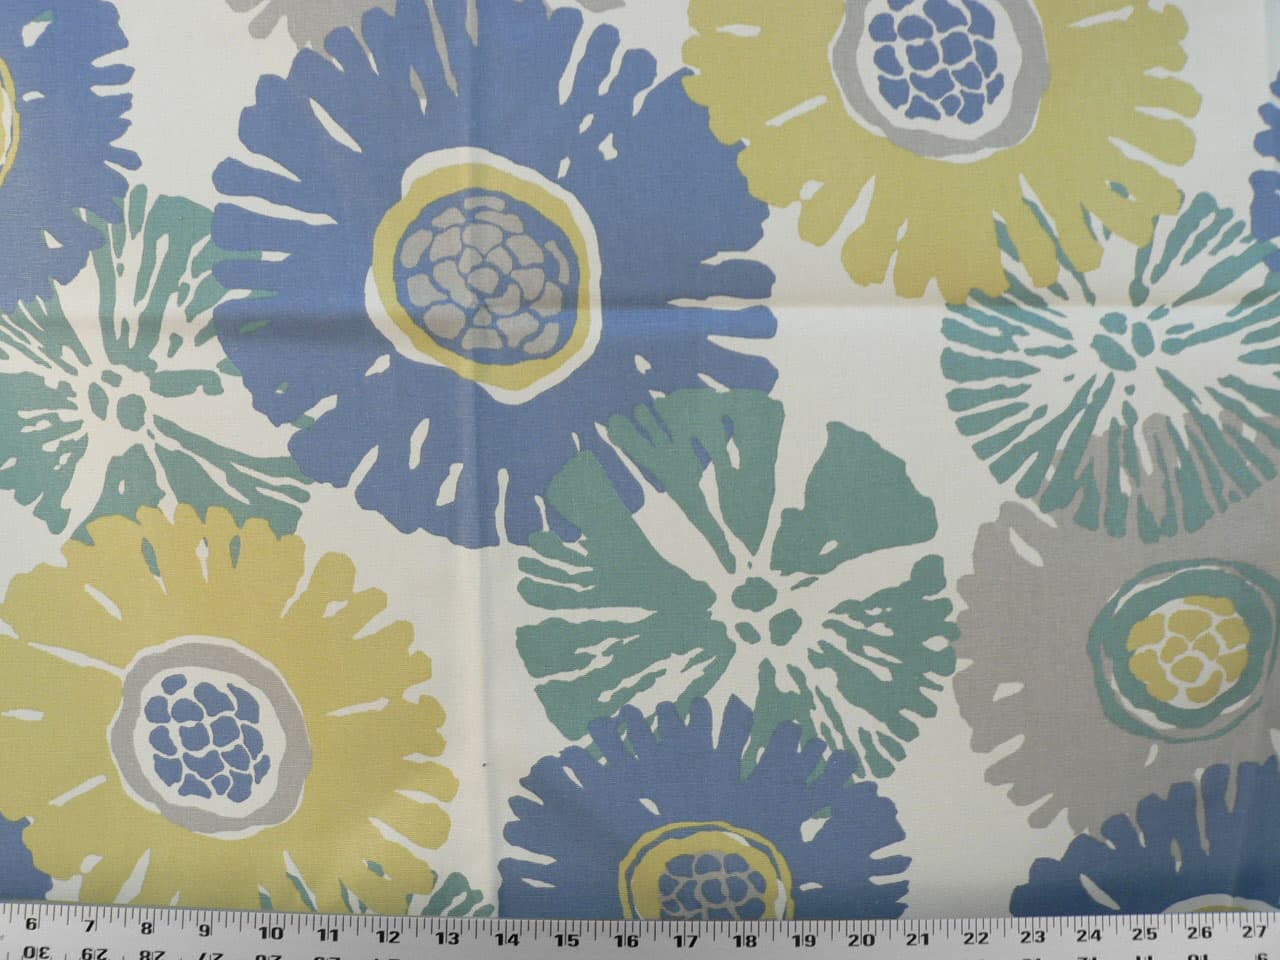 Apparel Fabric Custom Print Fabric In Full Bloom Floral in Ocean Blue Upholstery Fabric Outdoor Fabric Silk Fabric Quilt Cotton